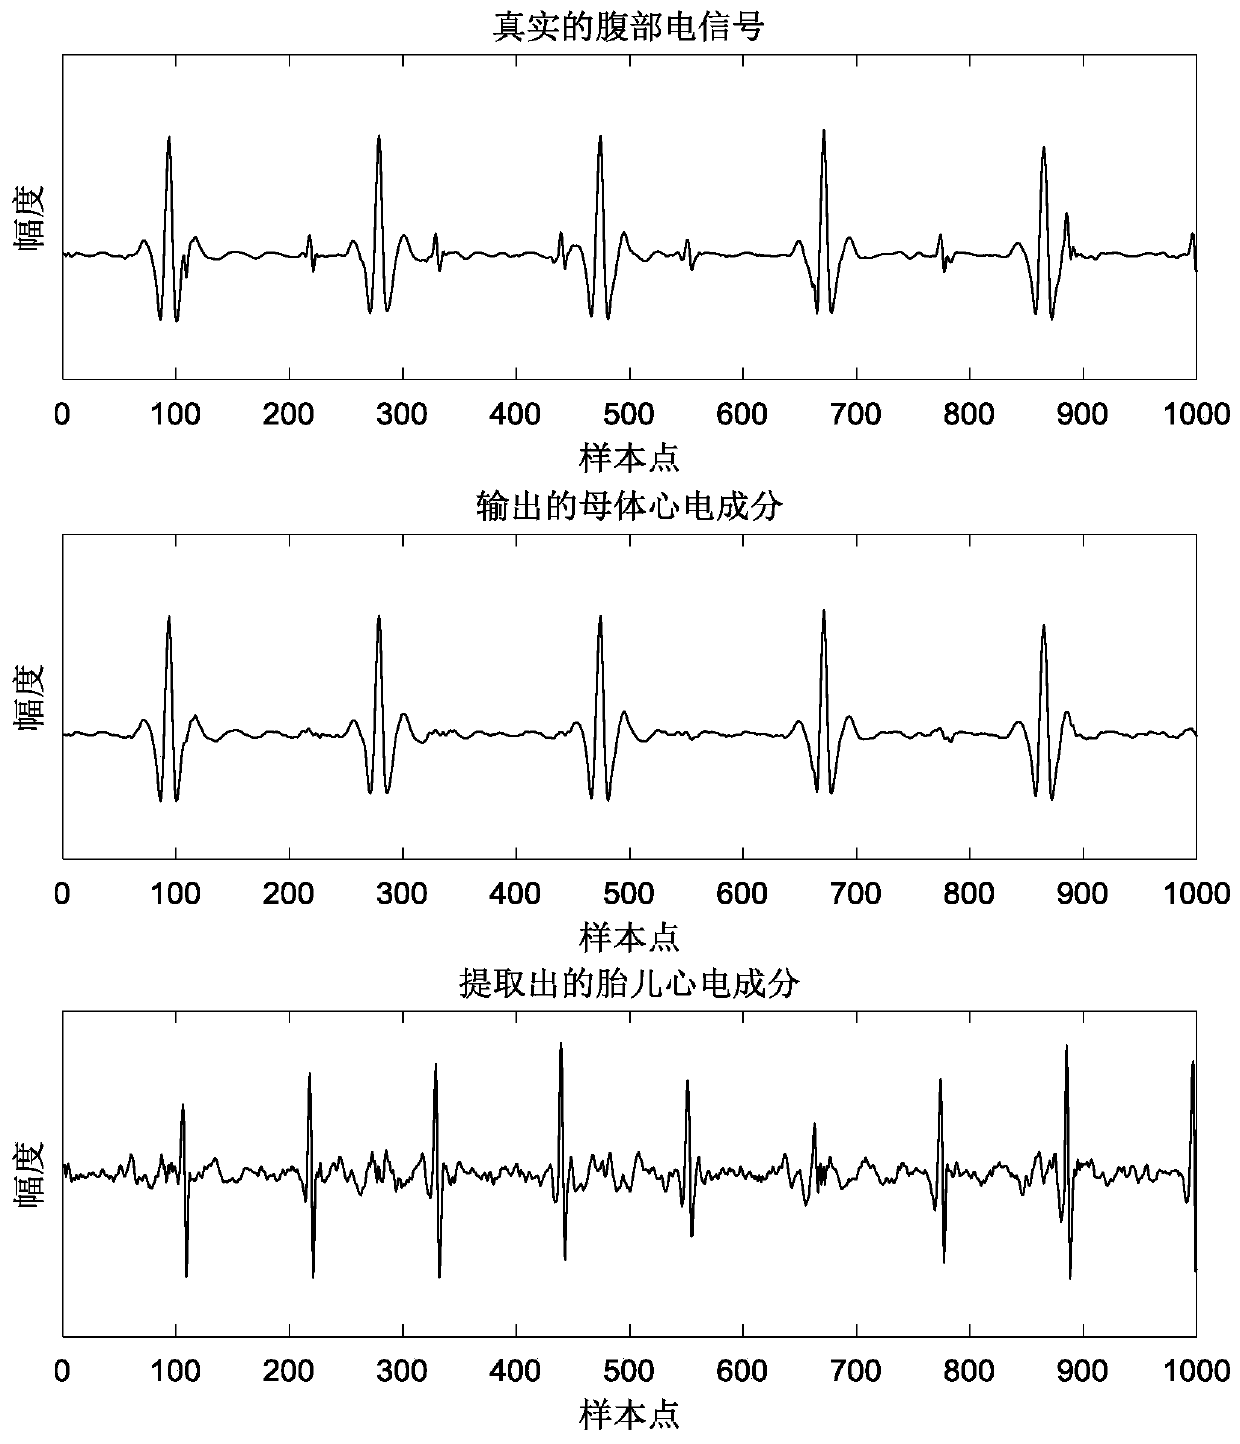 Fetal electrocardiogram extraction system based on convolutional encoding-decoding neural network and method